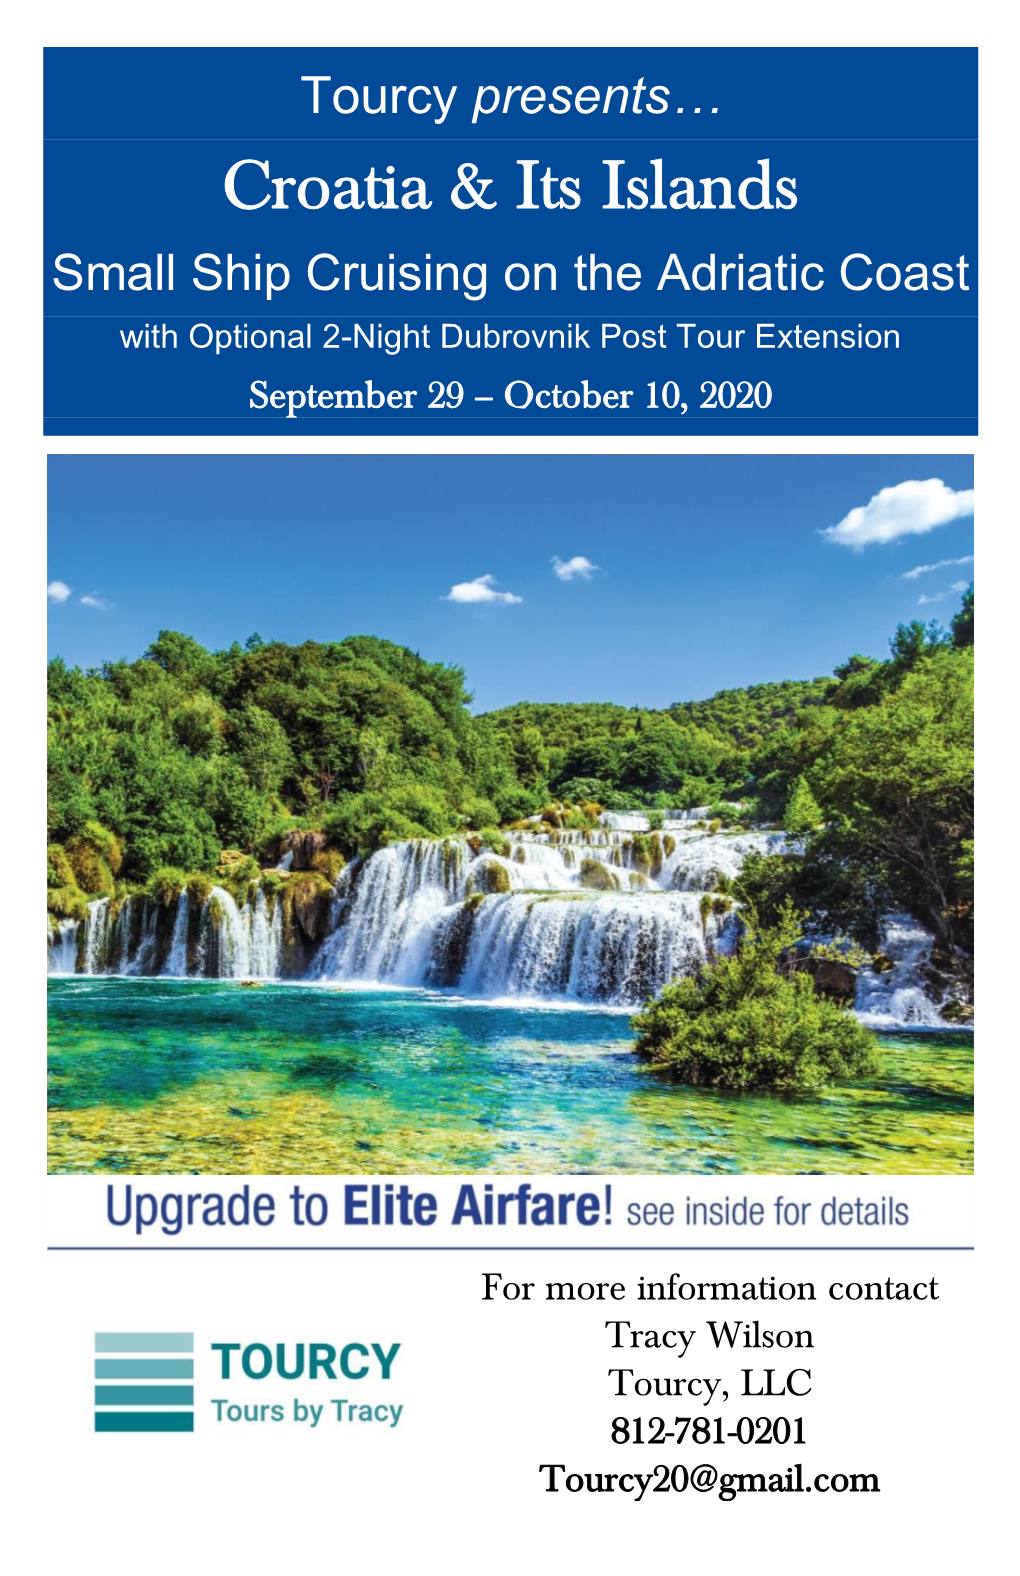 Tourcy Presents… Croatia & Its Islands Small Ship Cruising on the Adriatic Coast with Optional 2-Night Dubrovnik Post Tour Extension September 29 – October 10, 2020